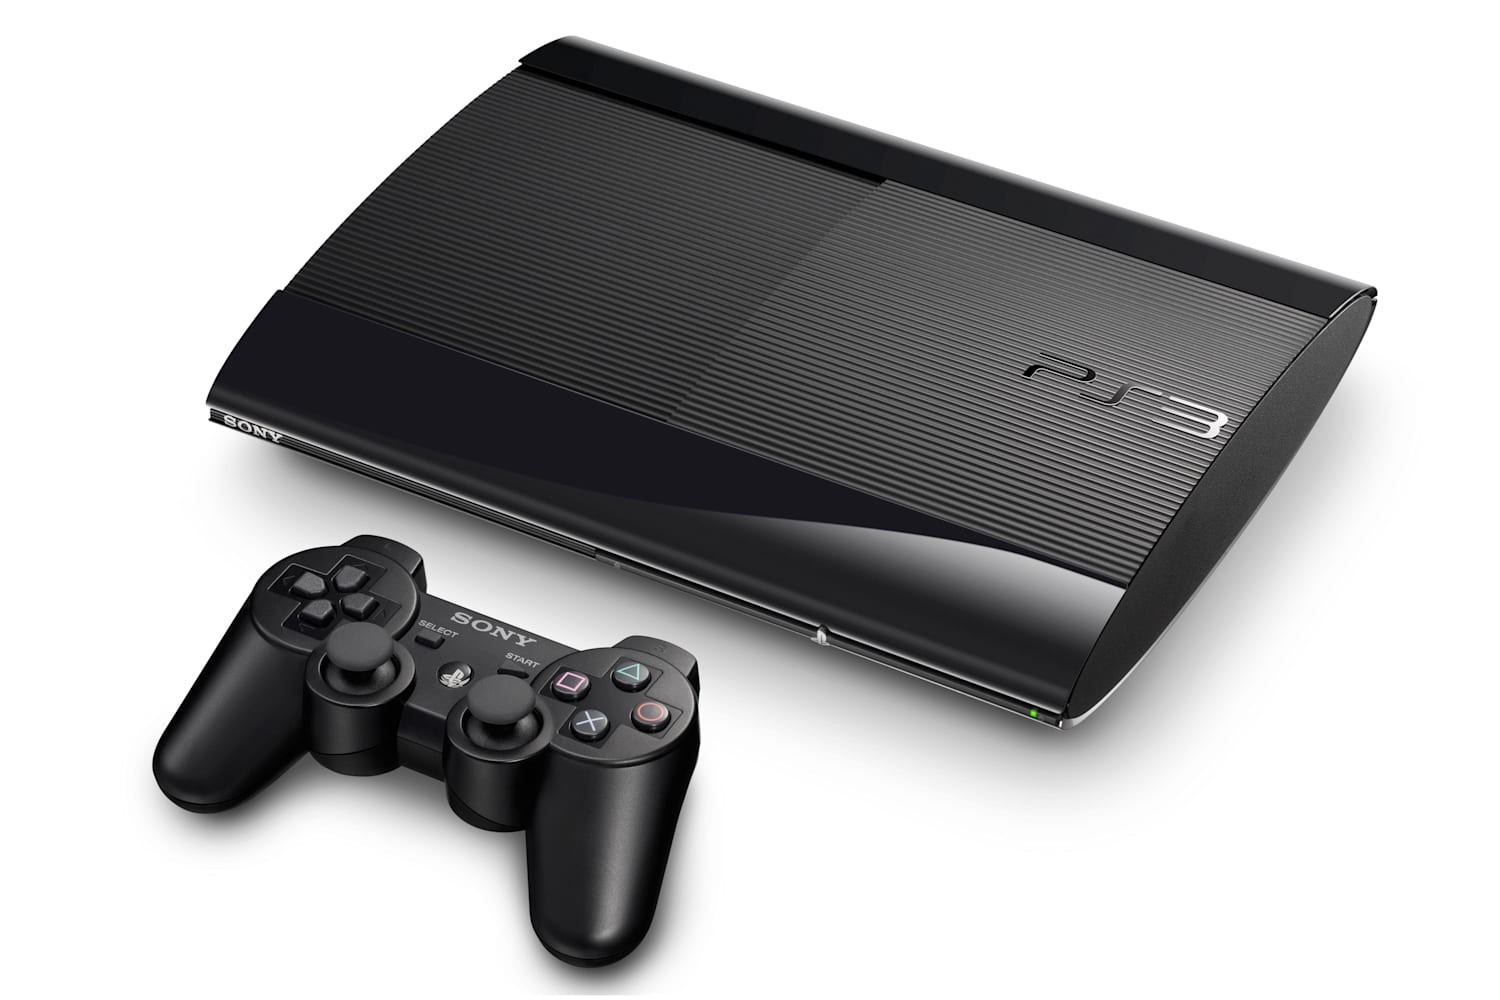 will a playstation 3 controller work on a ps4